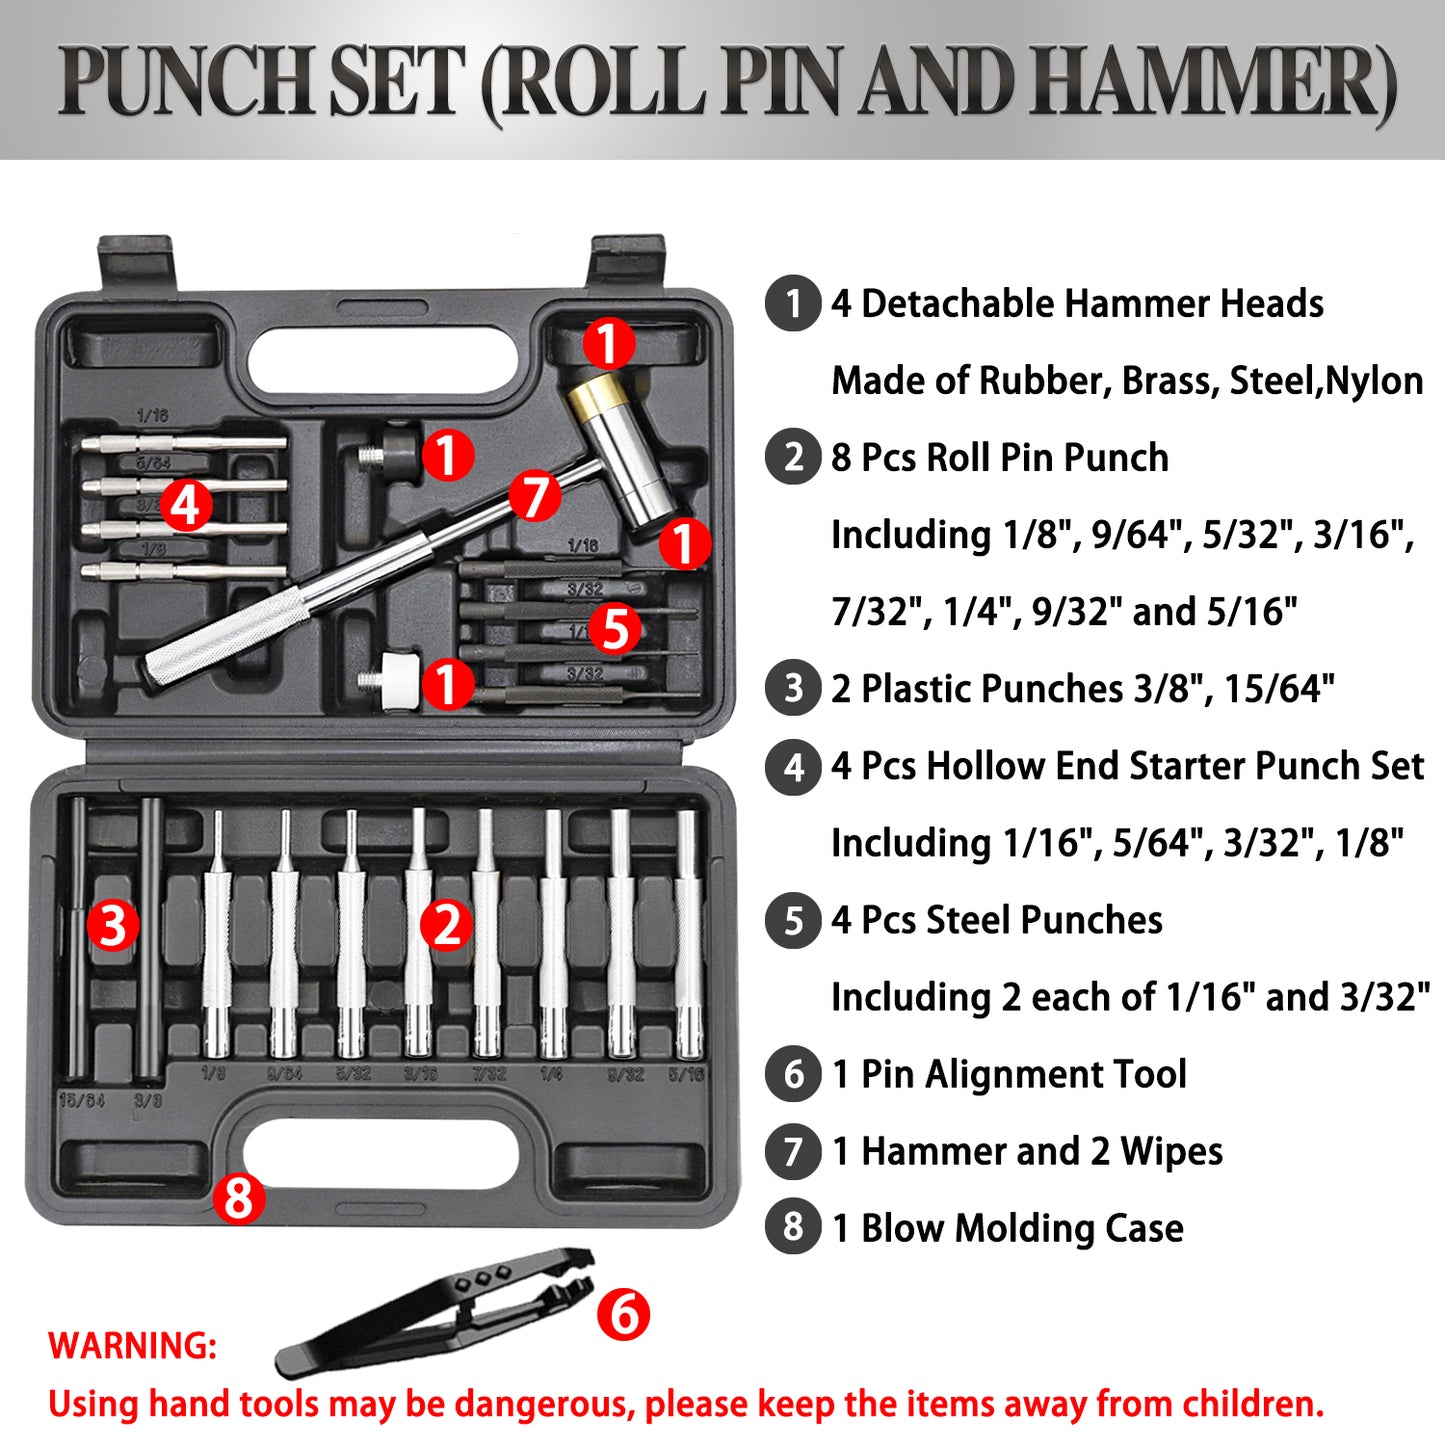 BESTNULE Gunsnithing Punch Set, Pin Punches, Punch Tool, Roll Pin Punch Set, Made of High Quality Metal Material Including Punches and Hammer, Mechanical Repair Tool, with Organizer Storage Box (with Bench Block)